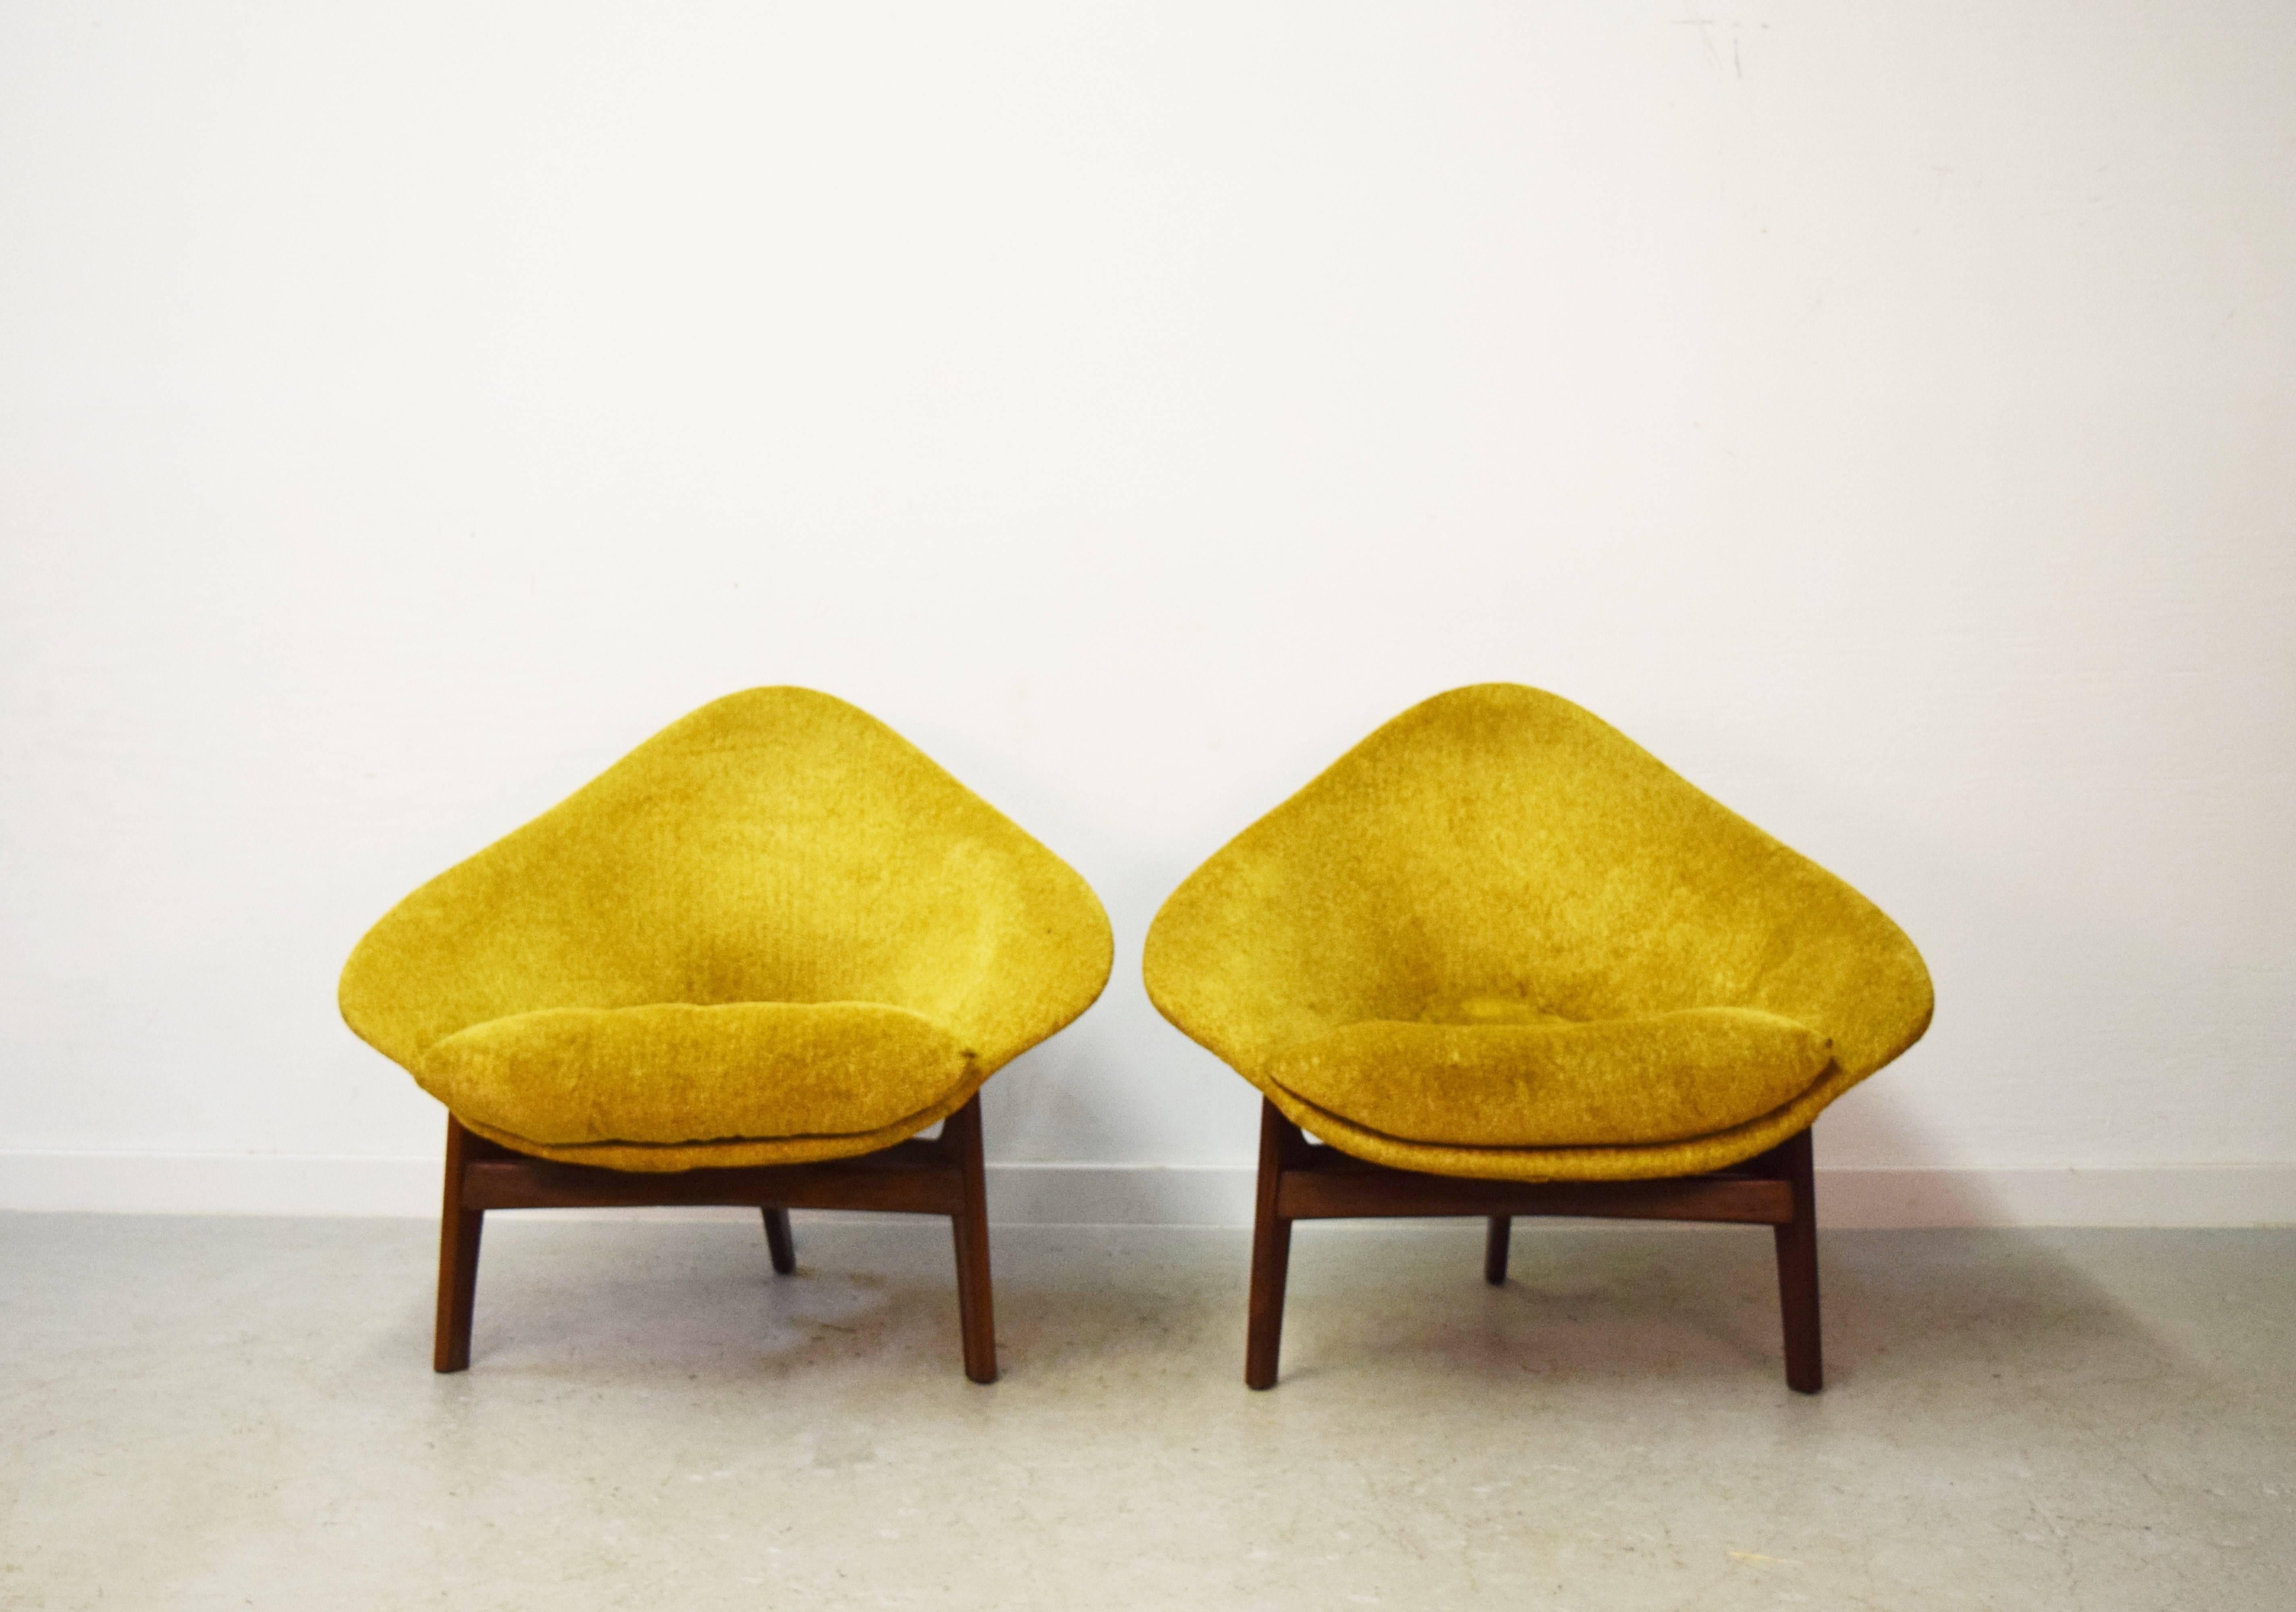 Pair of Adrian Pearsall lounge chairs for Craft Associates.